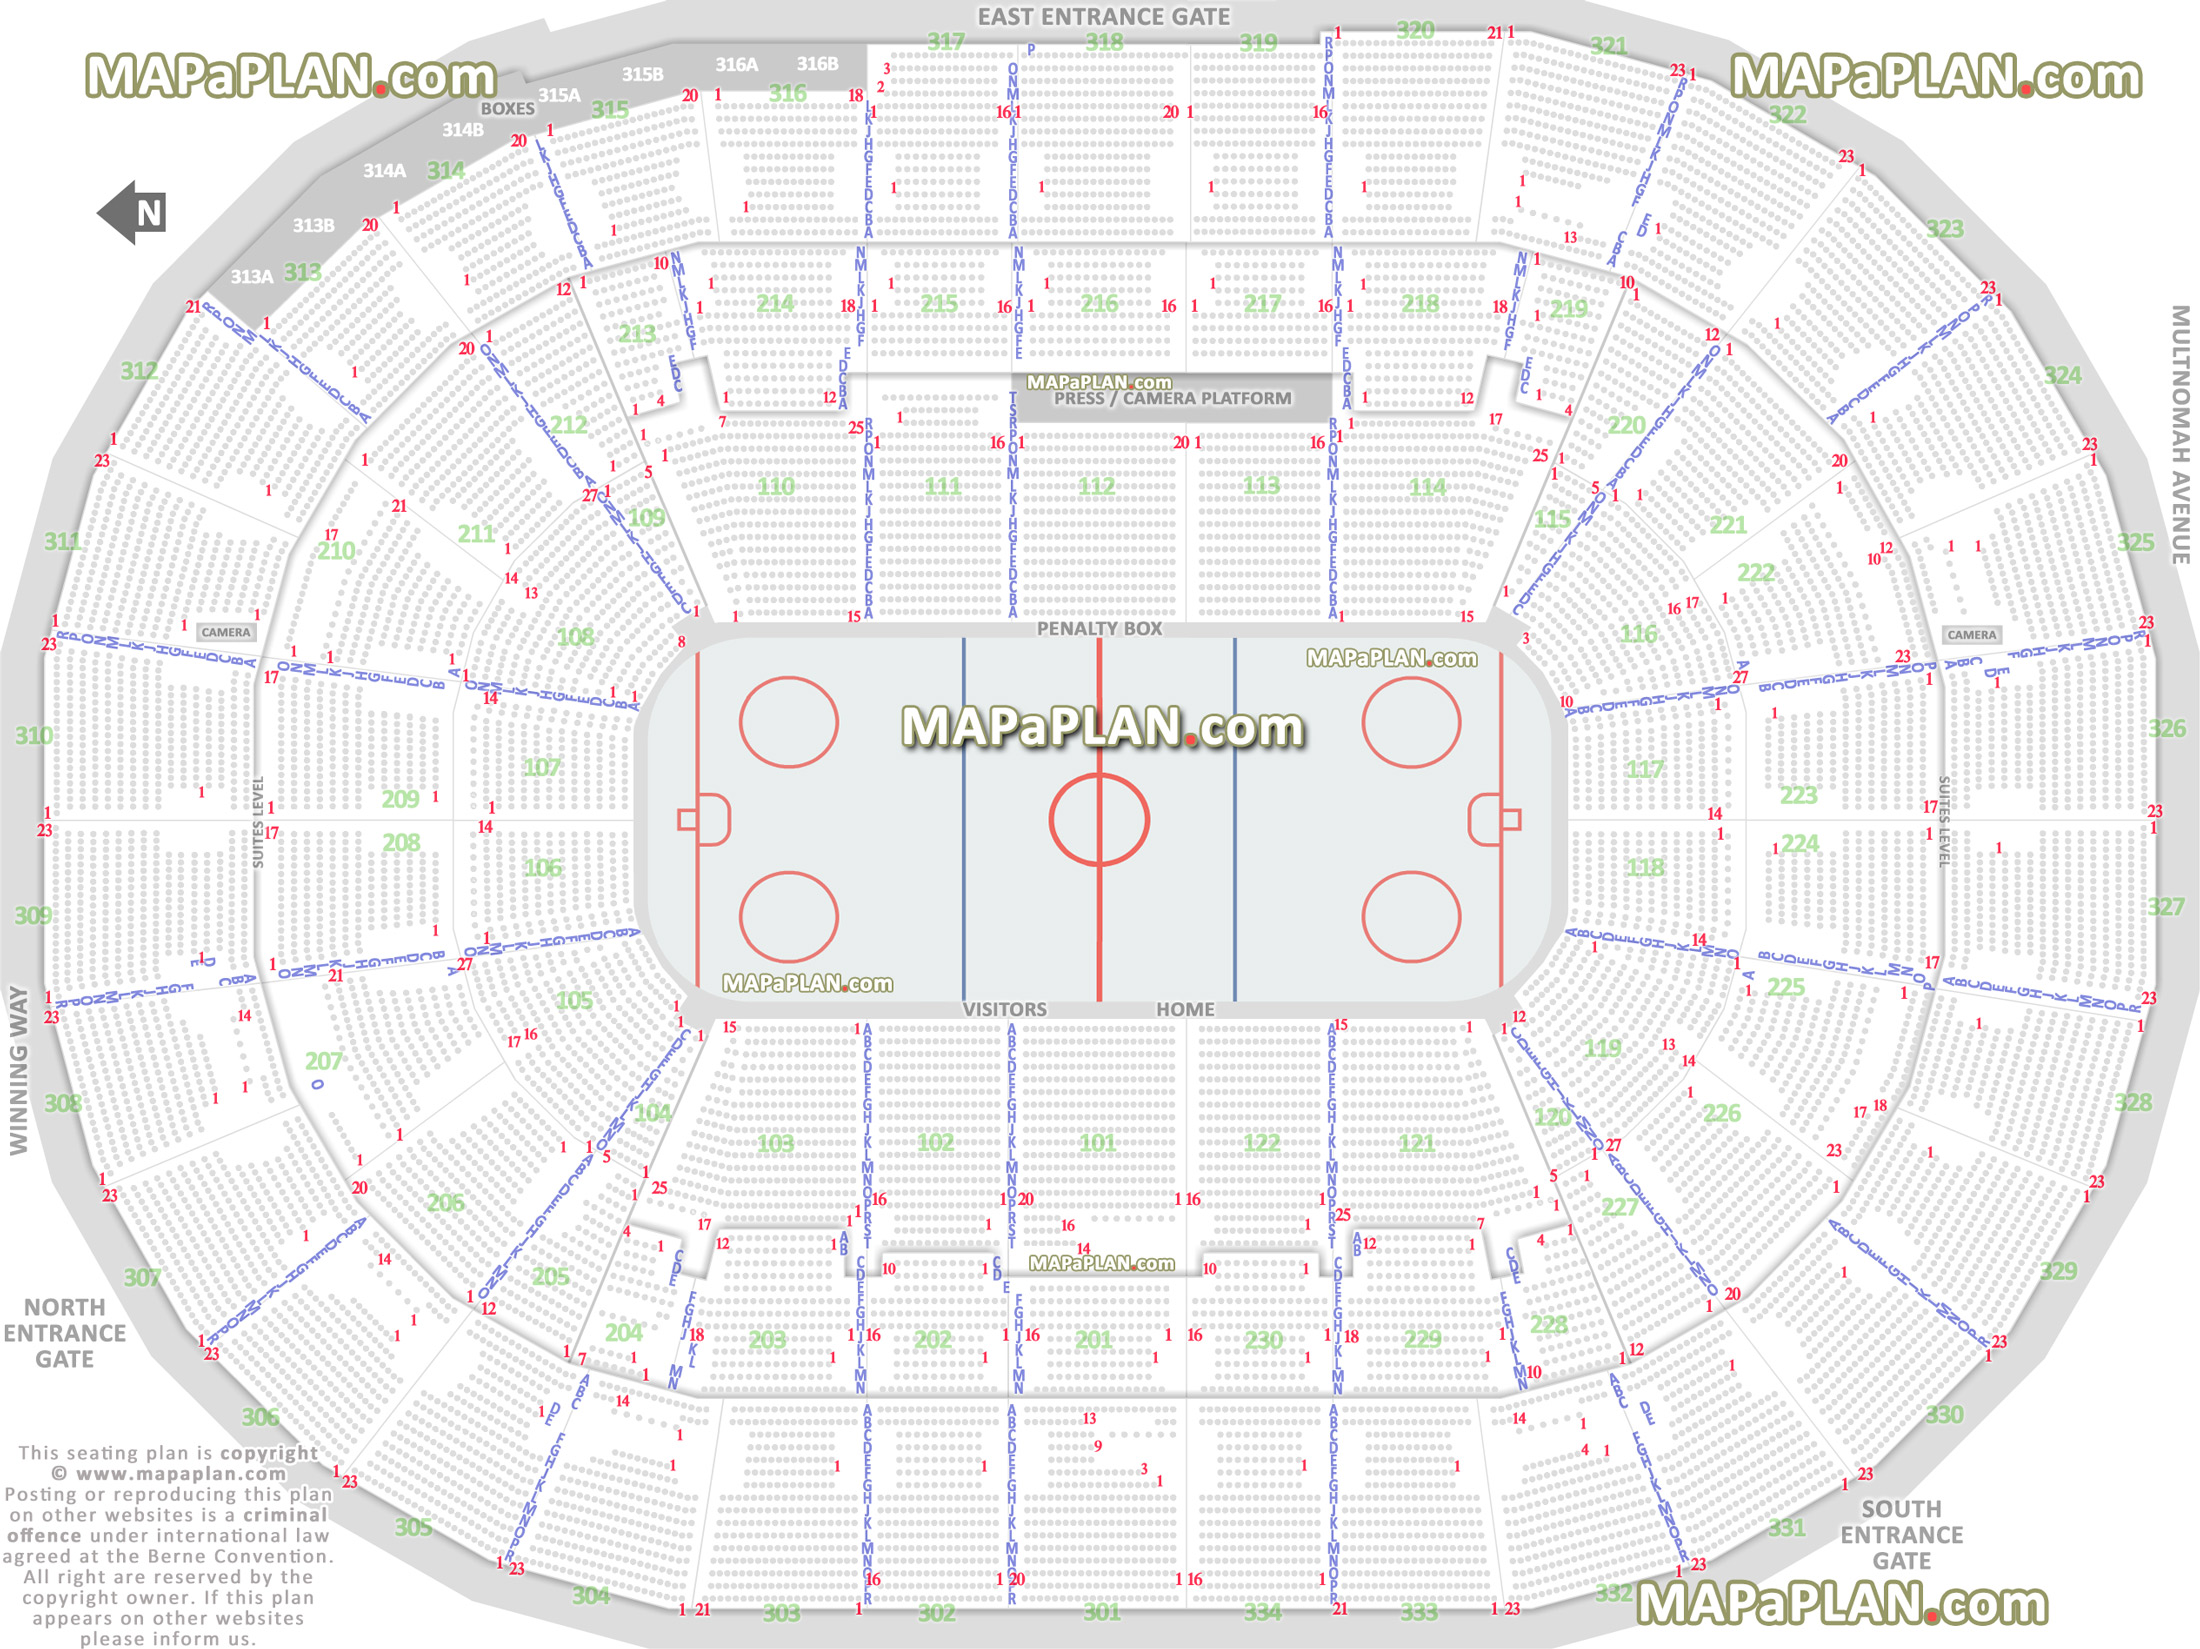 winterhawks ice hockey rink rose quarter oregon how many seats row section map penalty box home bench visitors double attack shoot twice zone glass rinkside Portland Moda Center seating chart